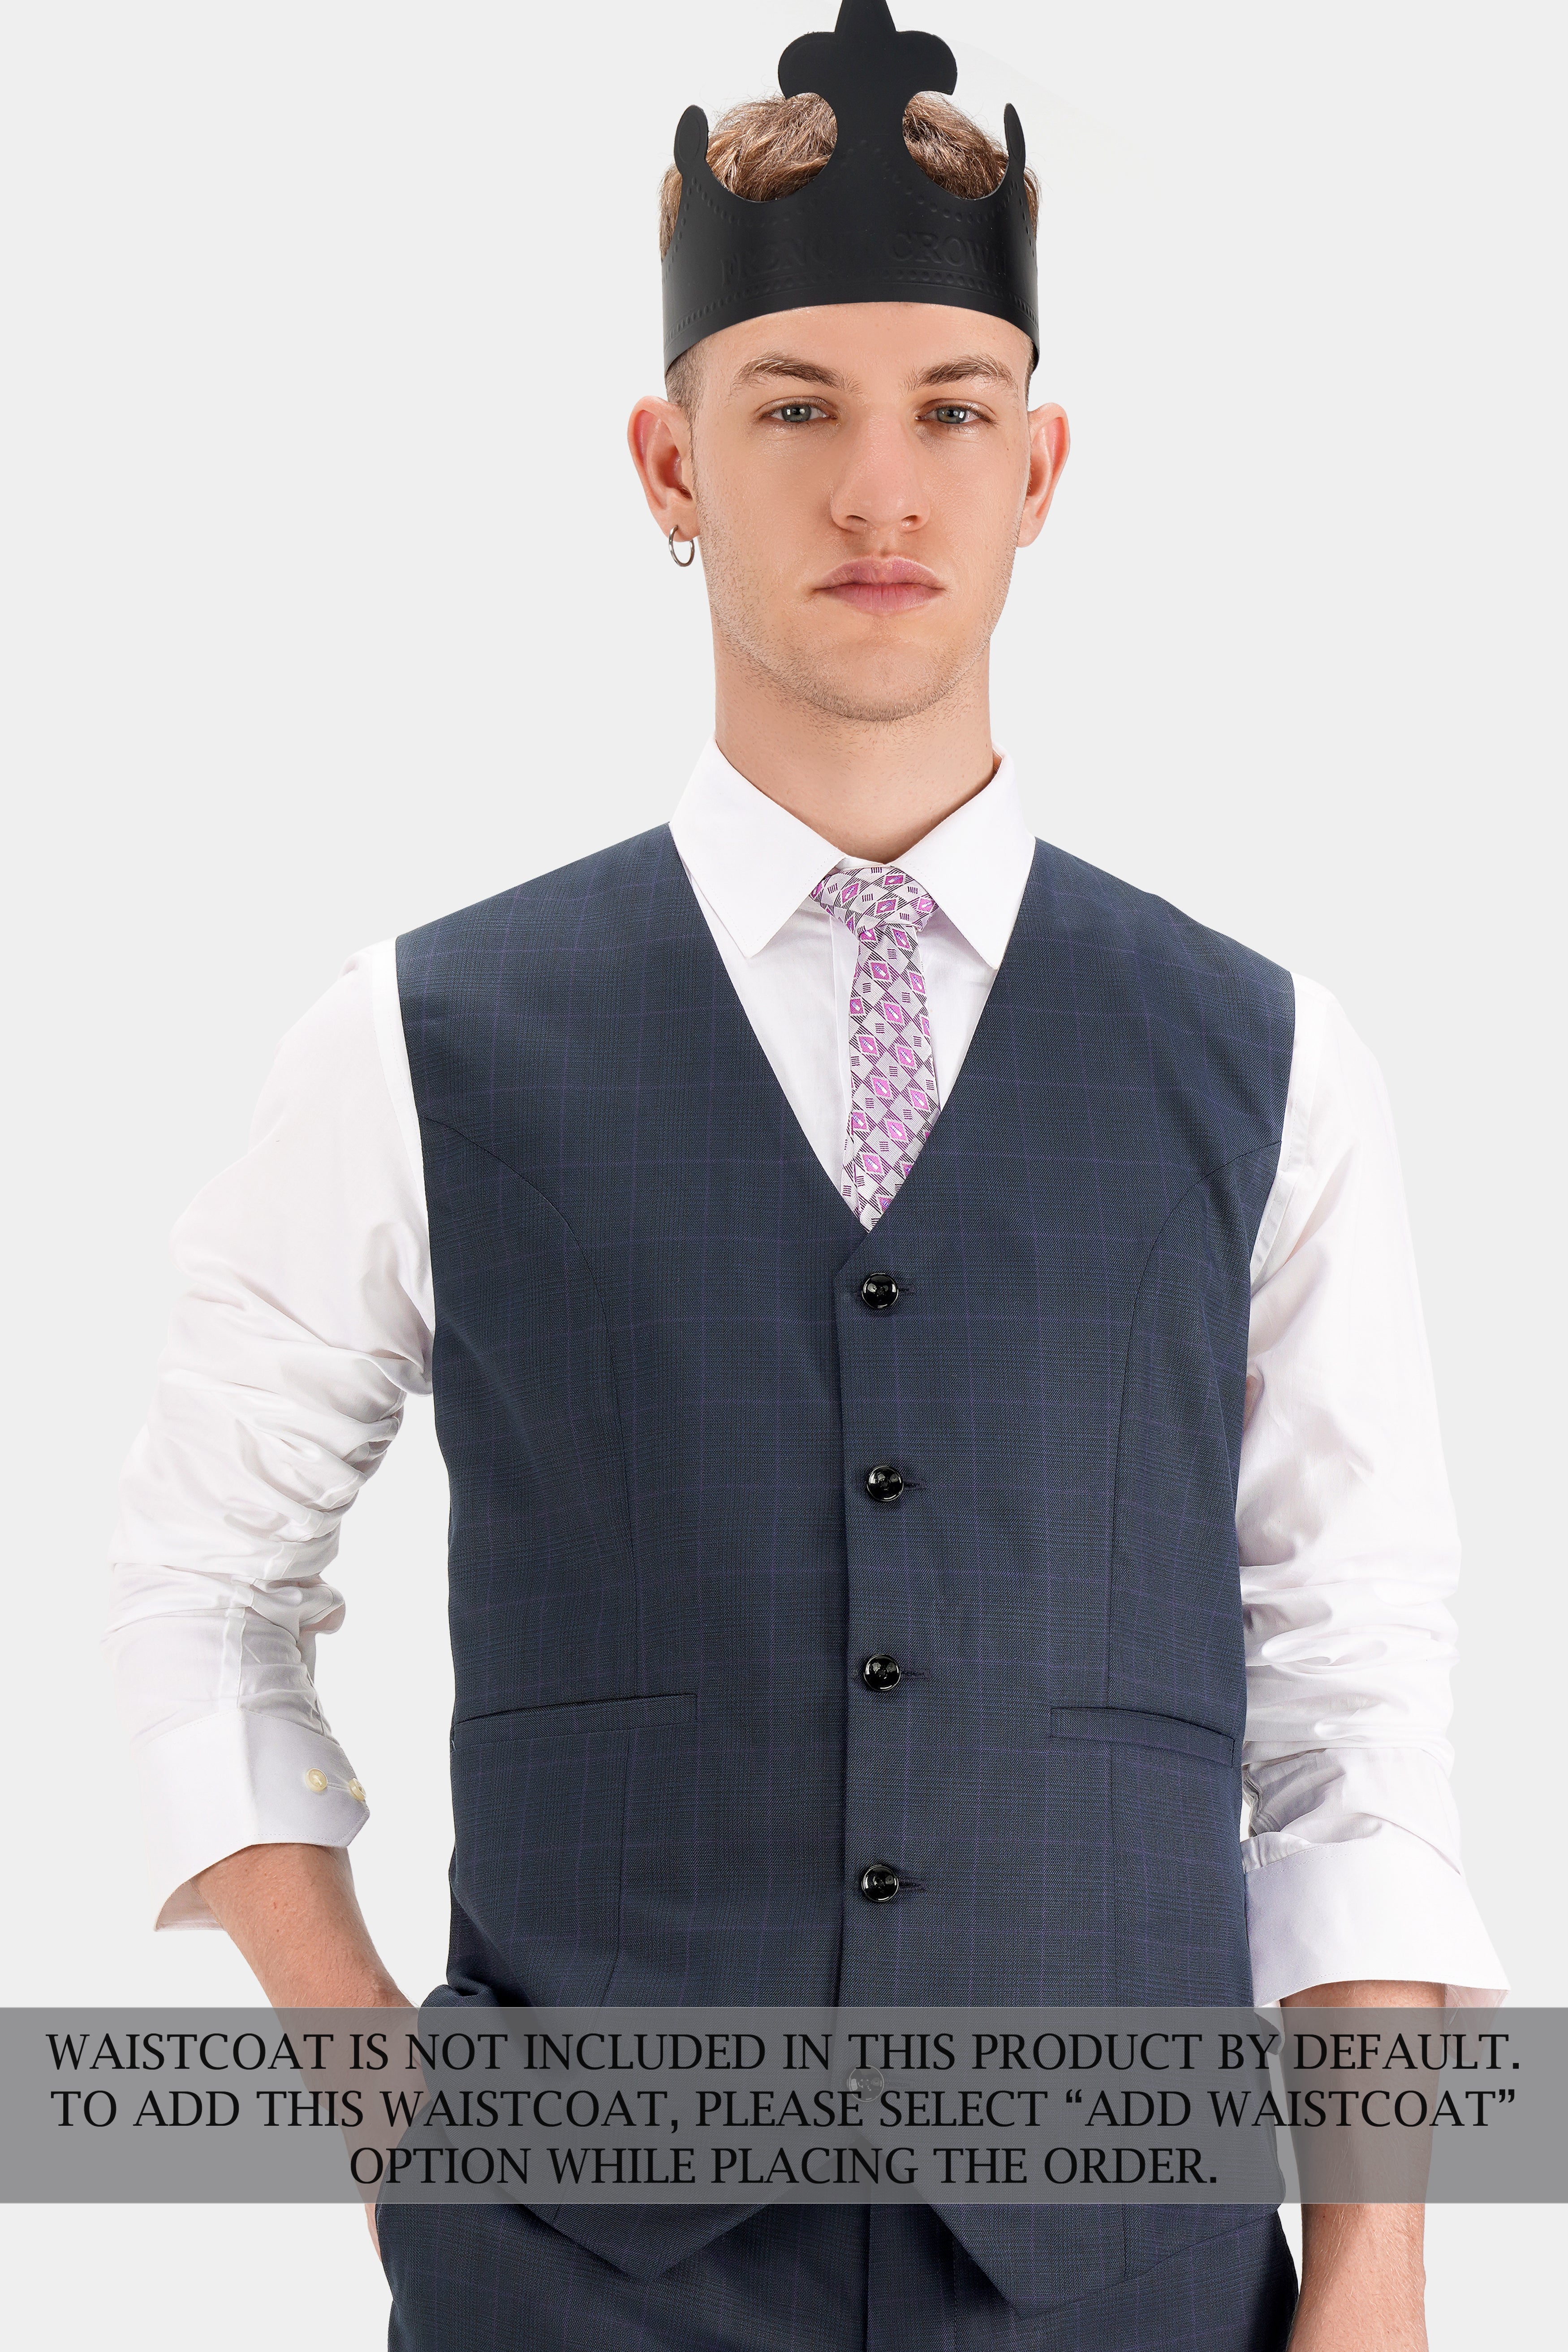 Baltic Blue with White Piping Work and Checkered Wool Rich Designer Suit ST2737-SB-D84-36, ST2737-SB-D84-38, ST2737-SB-D84-40, ST2737-SB-D84-42, ST2737-SB-D84-44, ST2737-SB-D84-46, ST2737-SB-D84-48, ST2737-SB-D84-50, ST2737-SB-D84-52, ST2737-SB-D84-54, ST2737-SB-D84-56, ST2737-SB-D84-58, ST2737-SB-D84-60